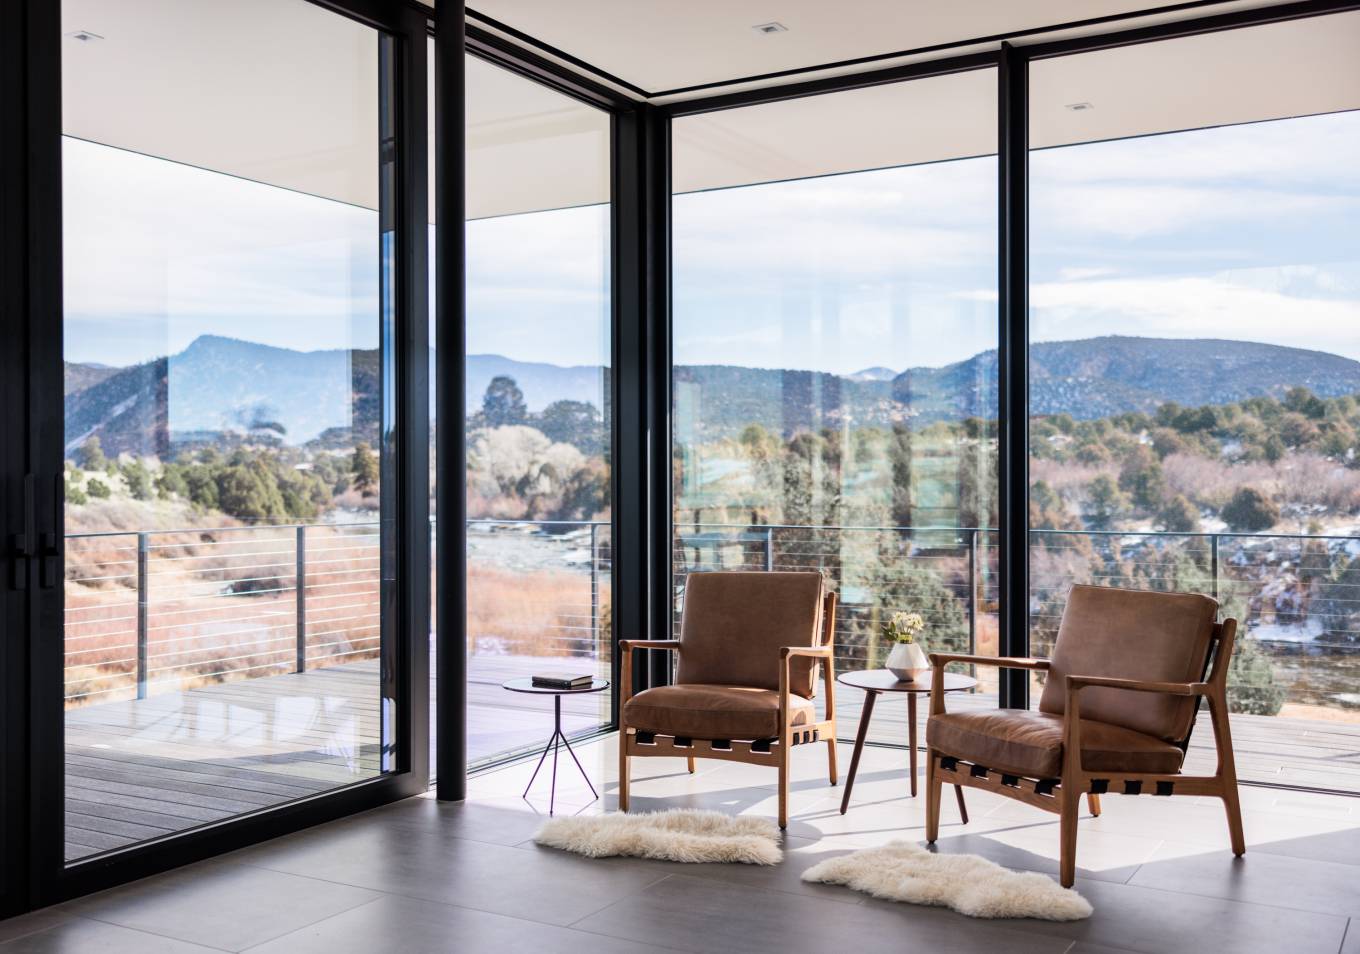 The design of the living spaces simultaneously connects the users to the incredible views